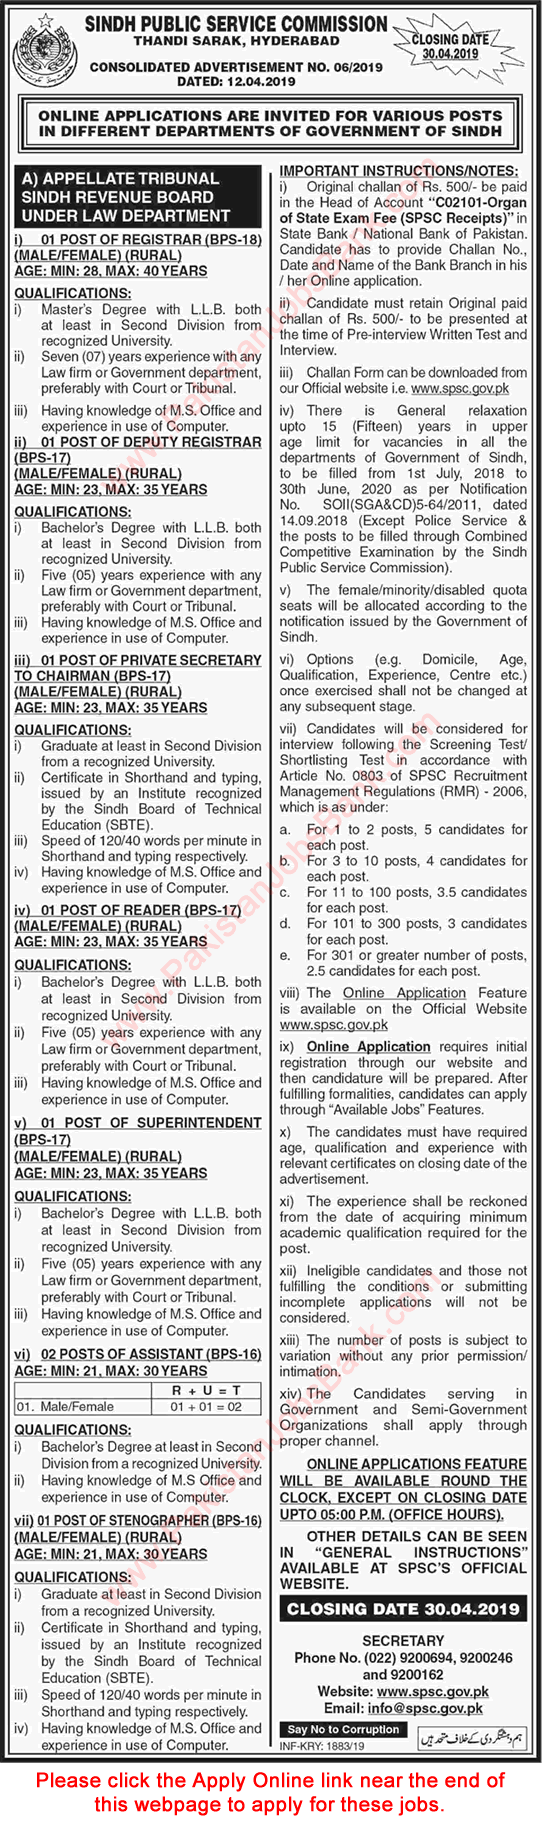 SPSC Jobs April 2019 Apply Online Consolidated Advertisement No 06/2019 6/2019 Latest